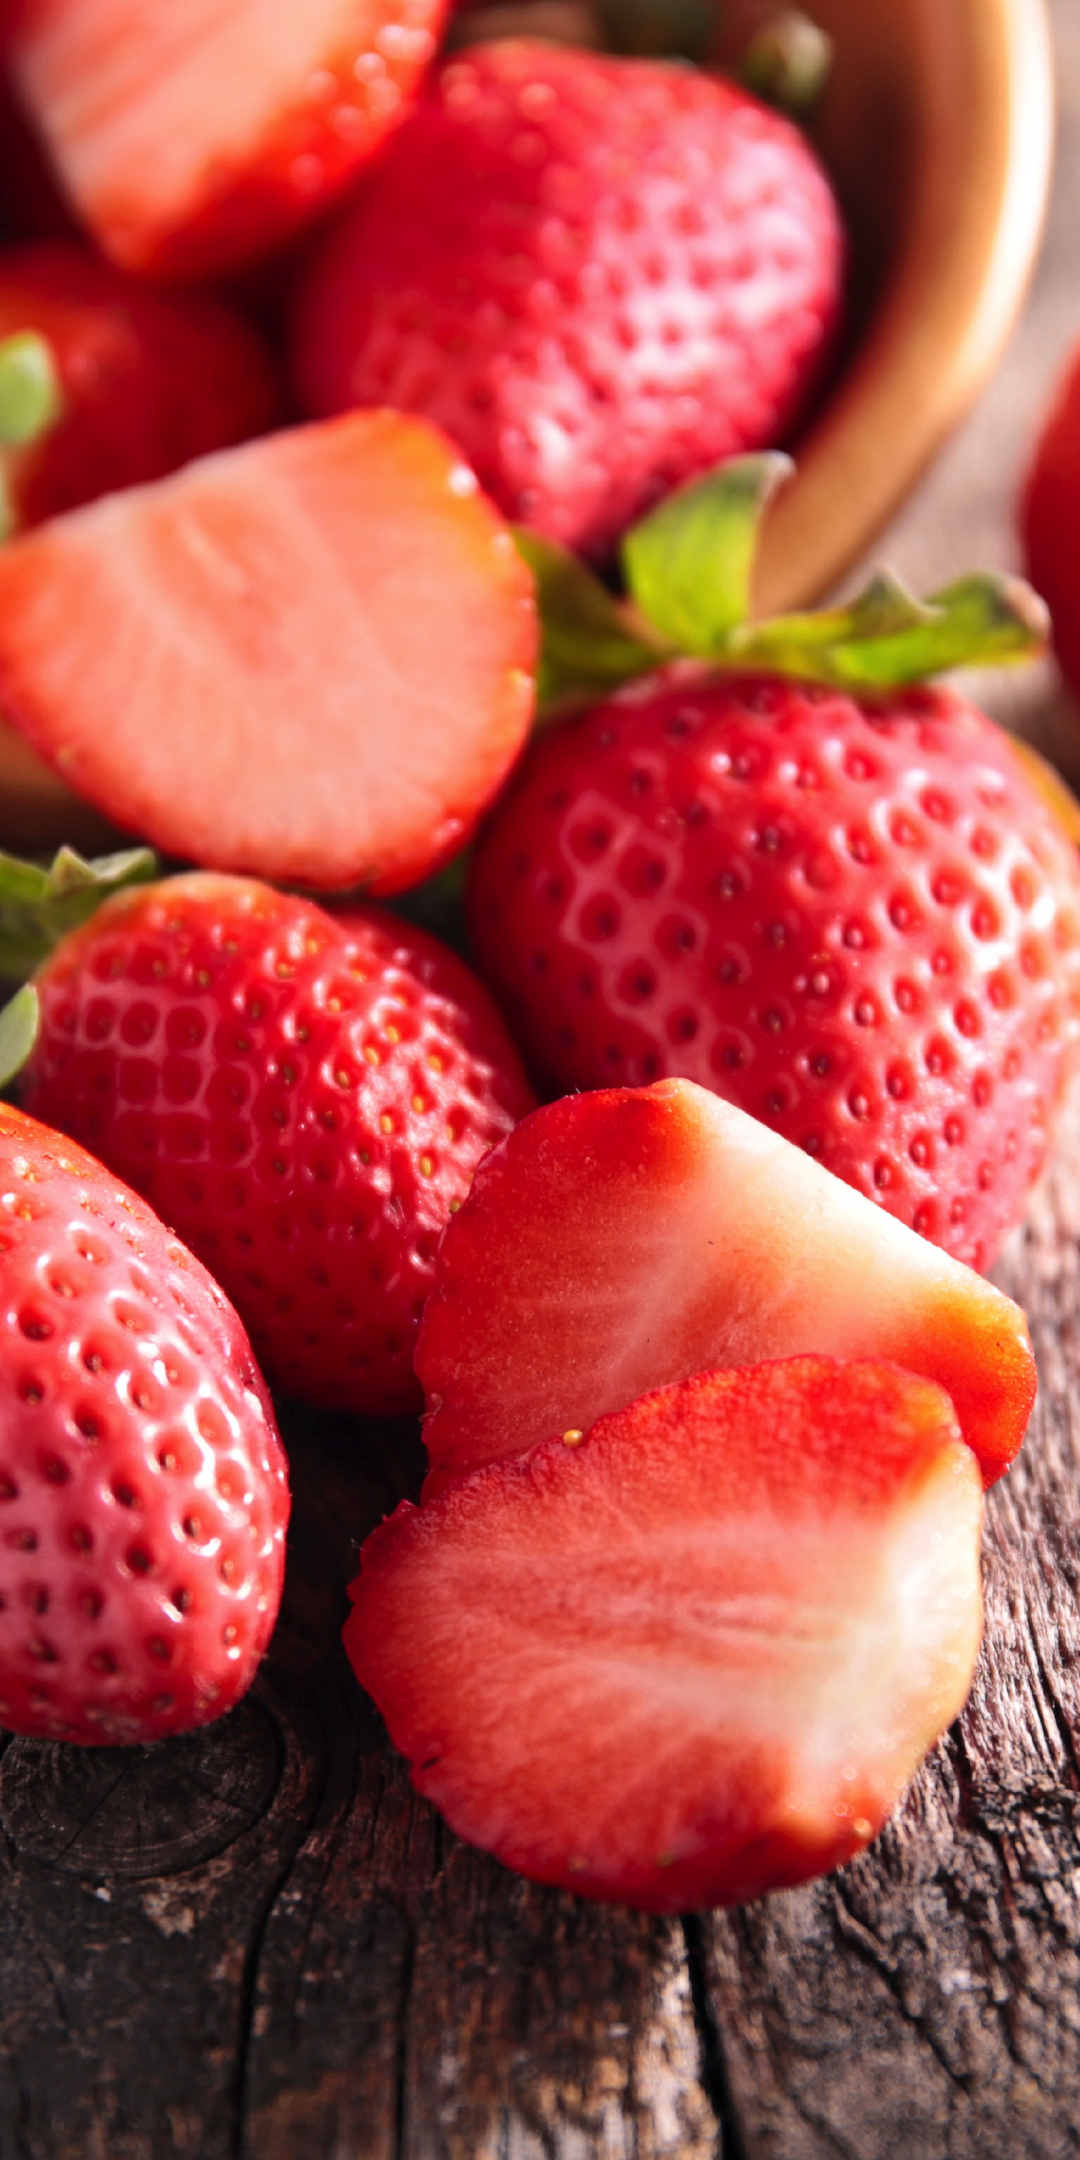 Strawberry, fruits, berries, basket, slices, 1080x2160 wallpaper